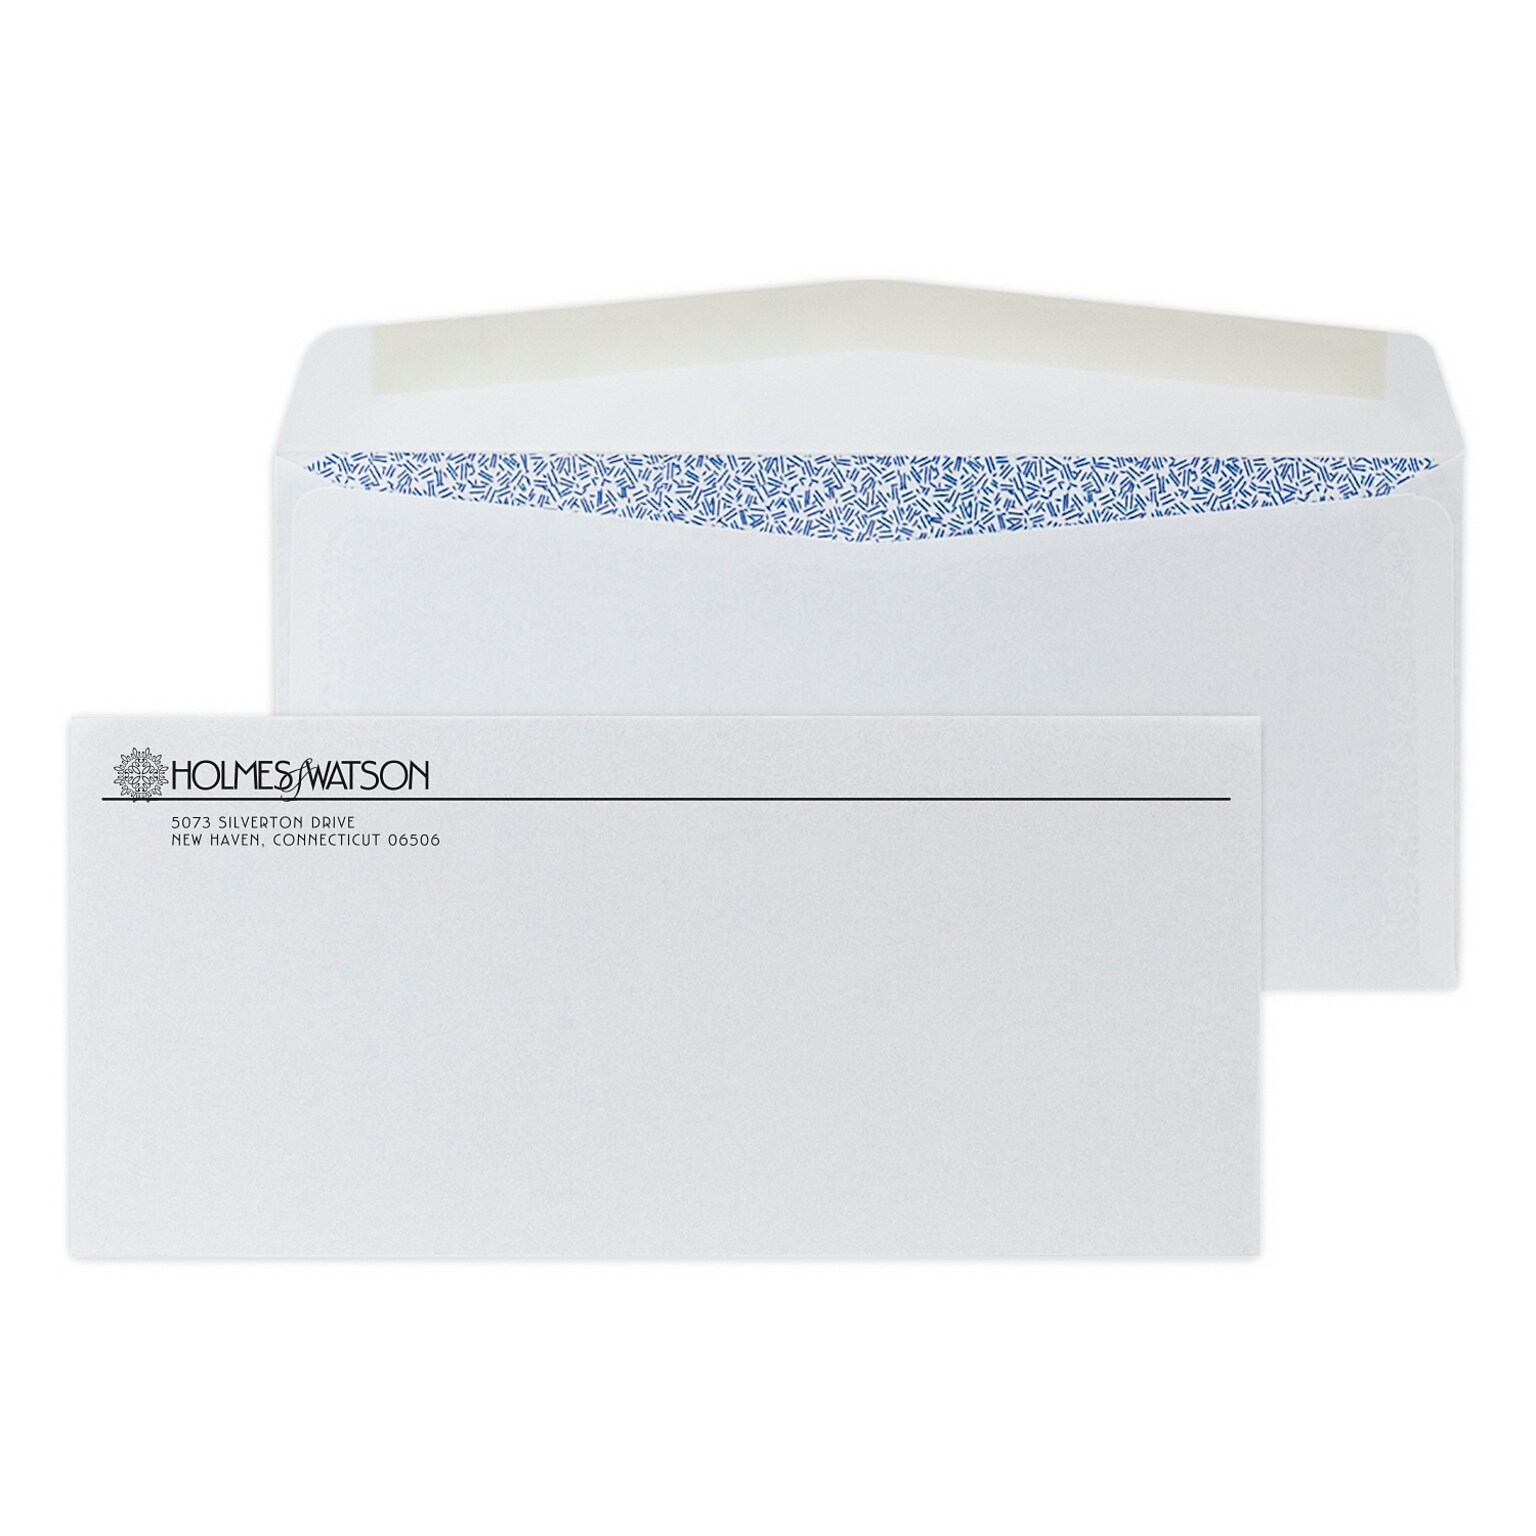 Custom #10 Standard Envelopes with Security Tint, 4 1/8 x 9 1/2, 24# White Wove, 1 Standard Ink, 250 / Pack